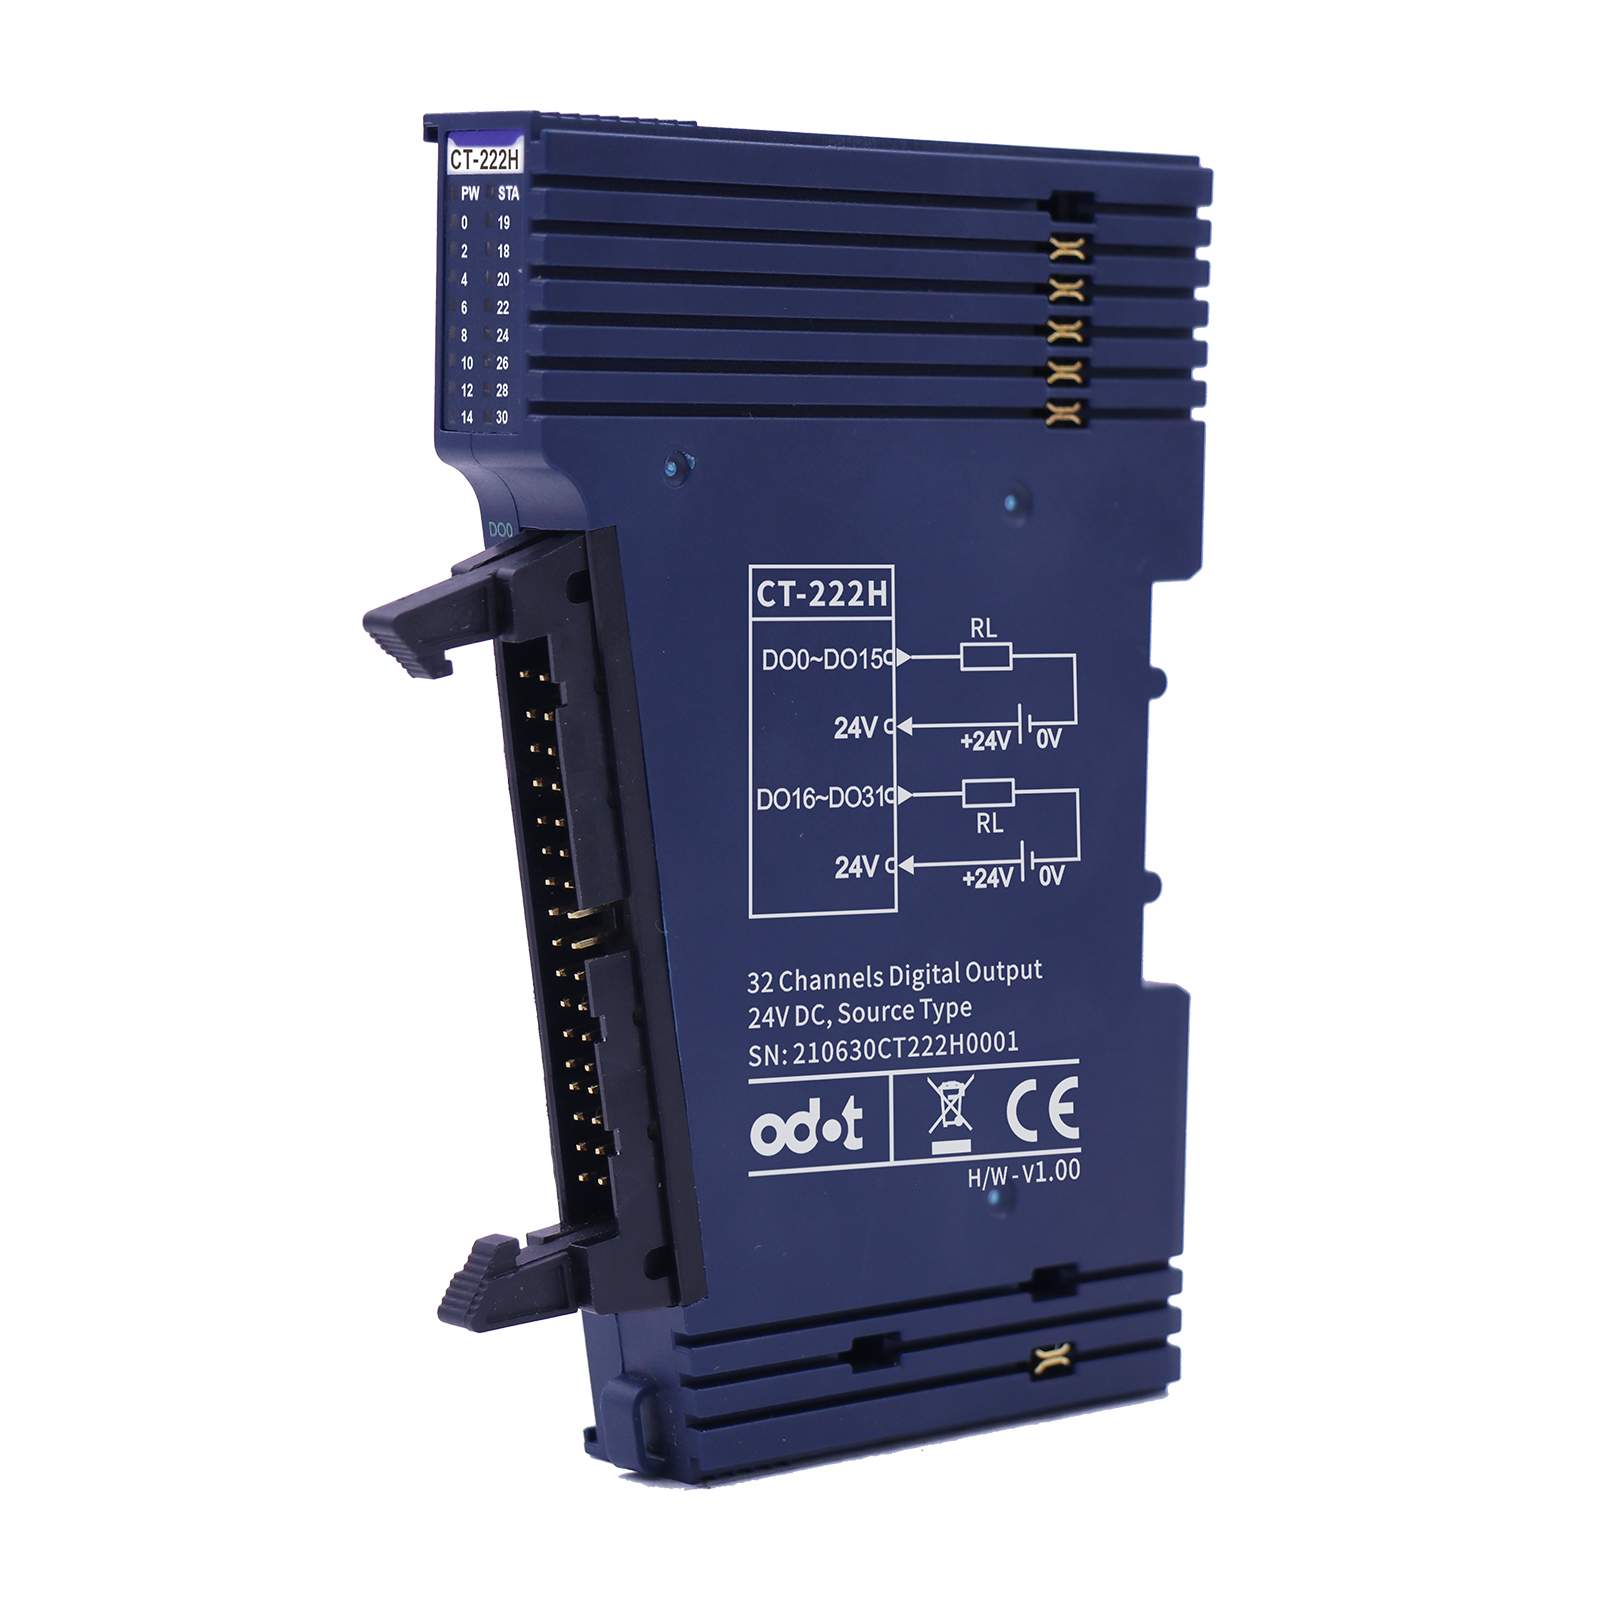 PriceList for Automatizacion Industrial Plc - CT-222H: 32 channels digital output, source, 24Vdc/0.5A，34Pin male connector – ODOT